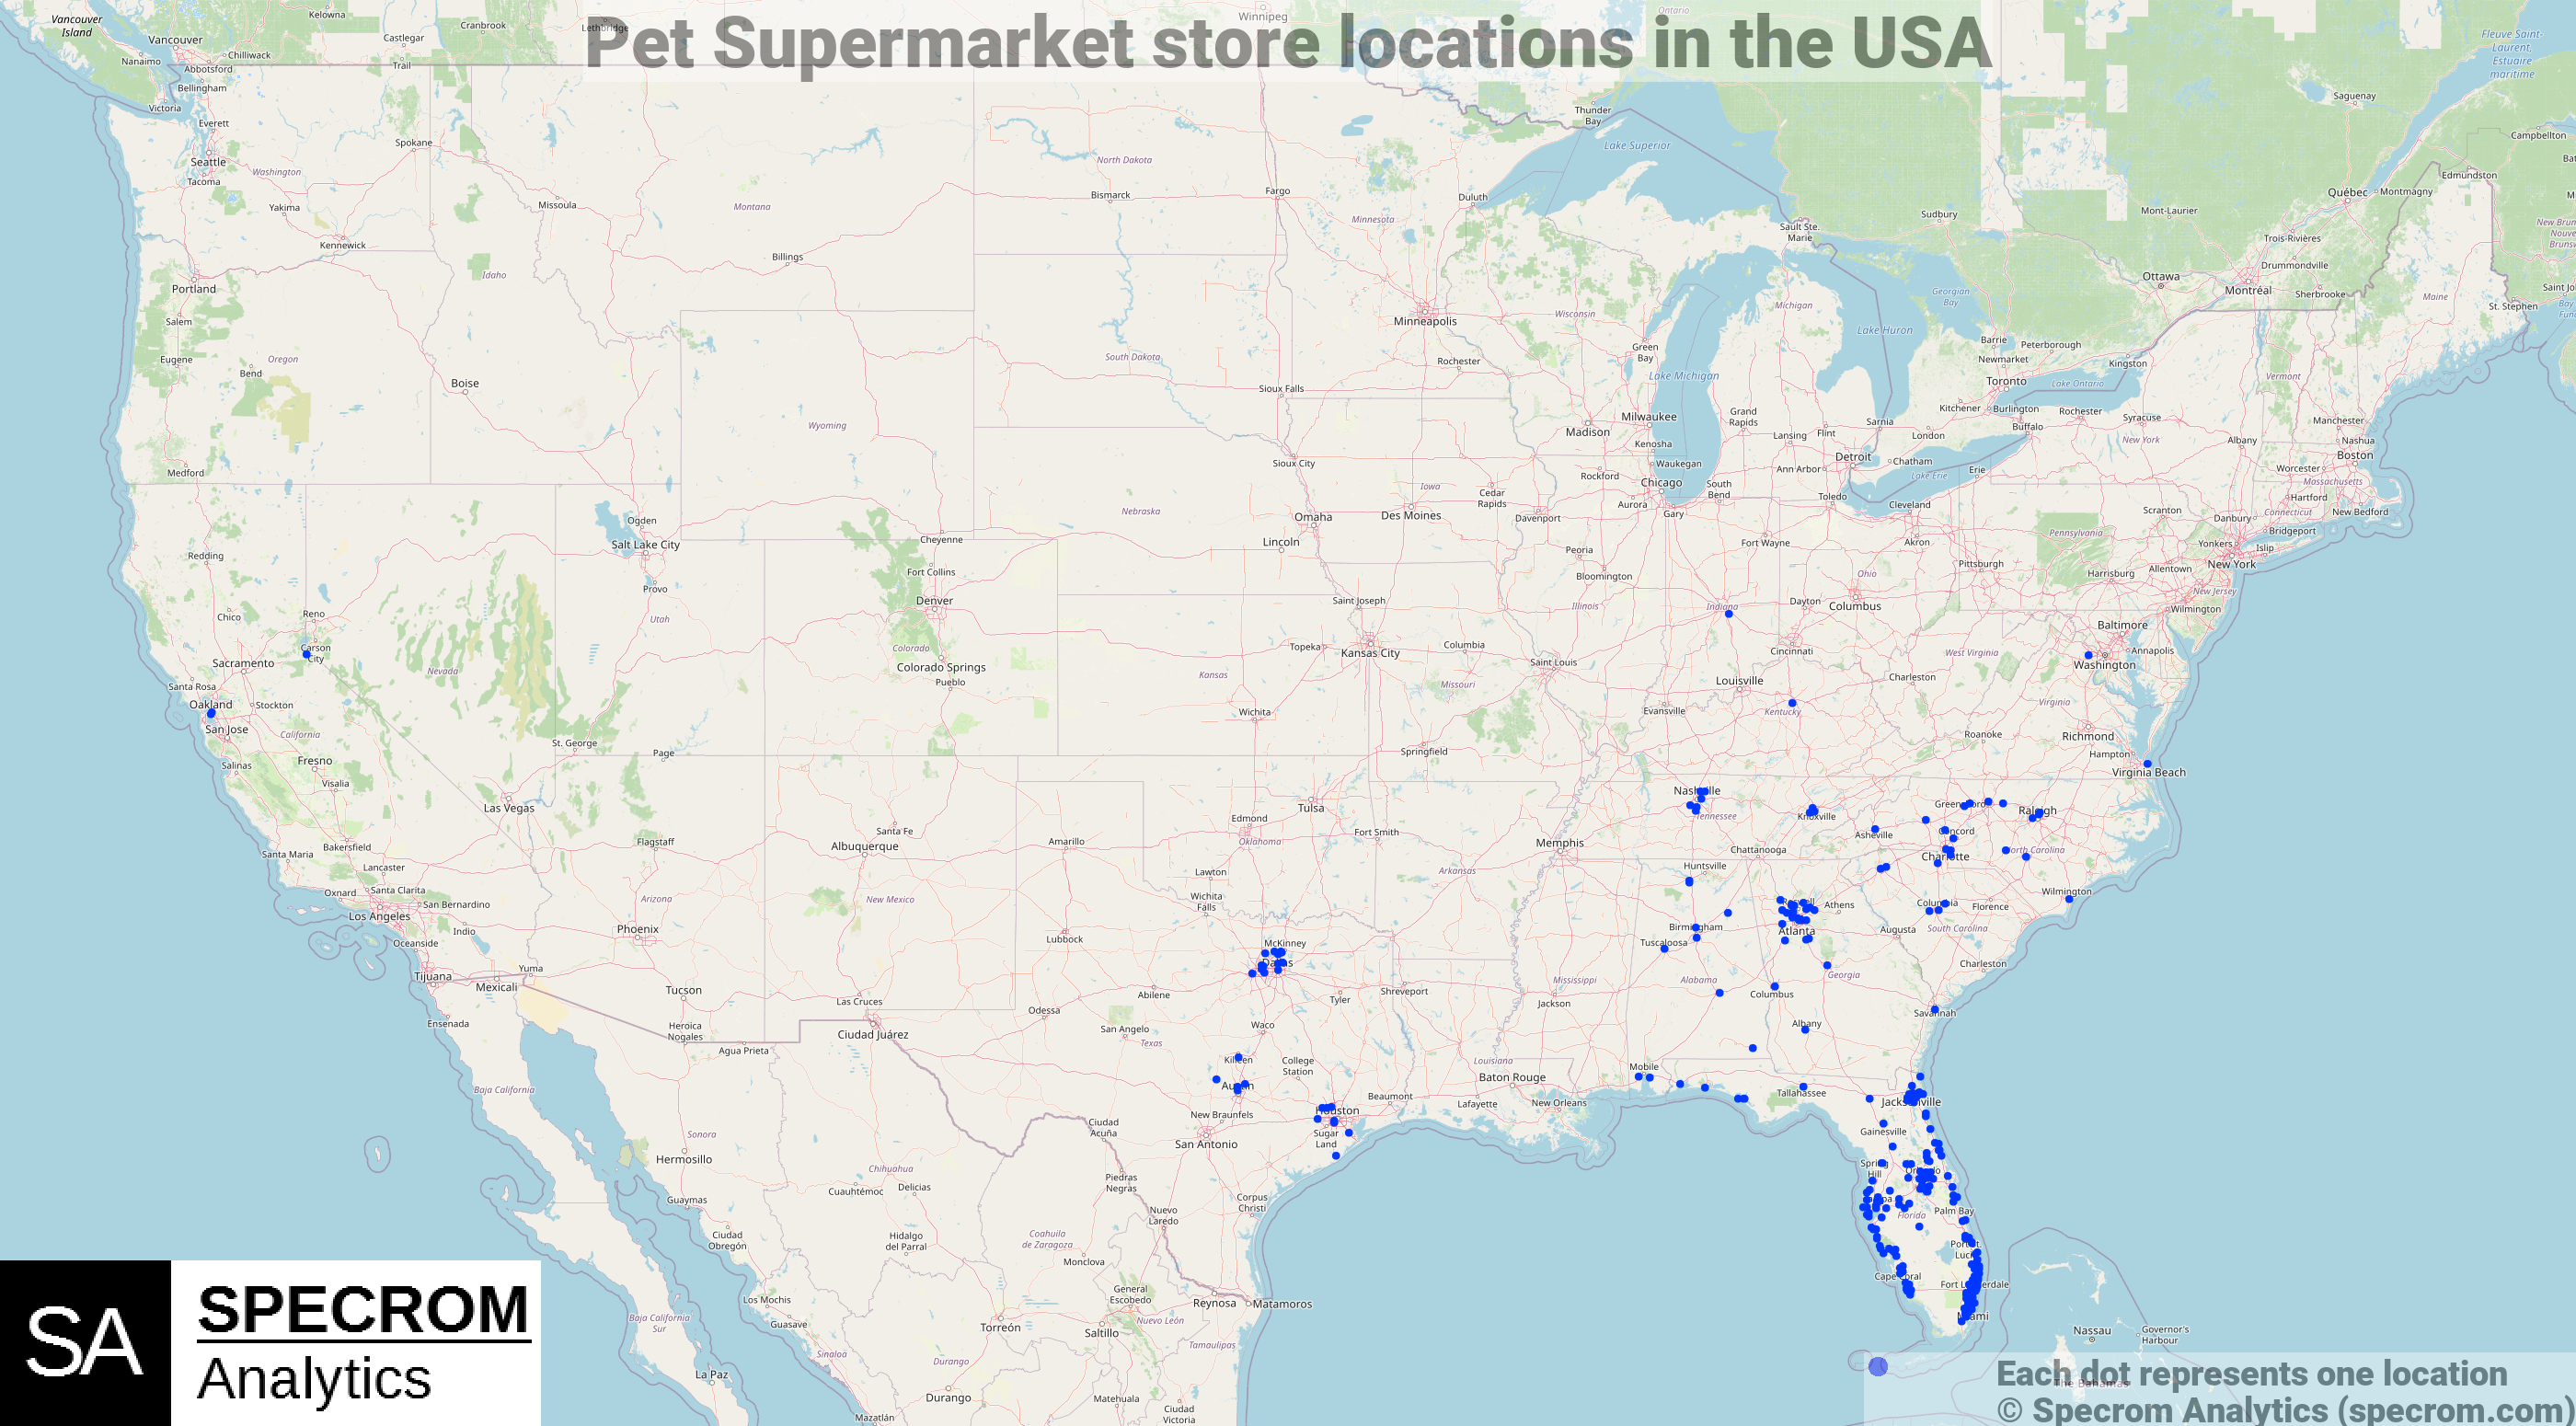 Pet Supermarket store locations in the USA